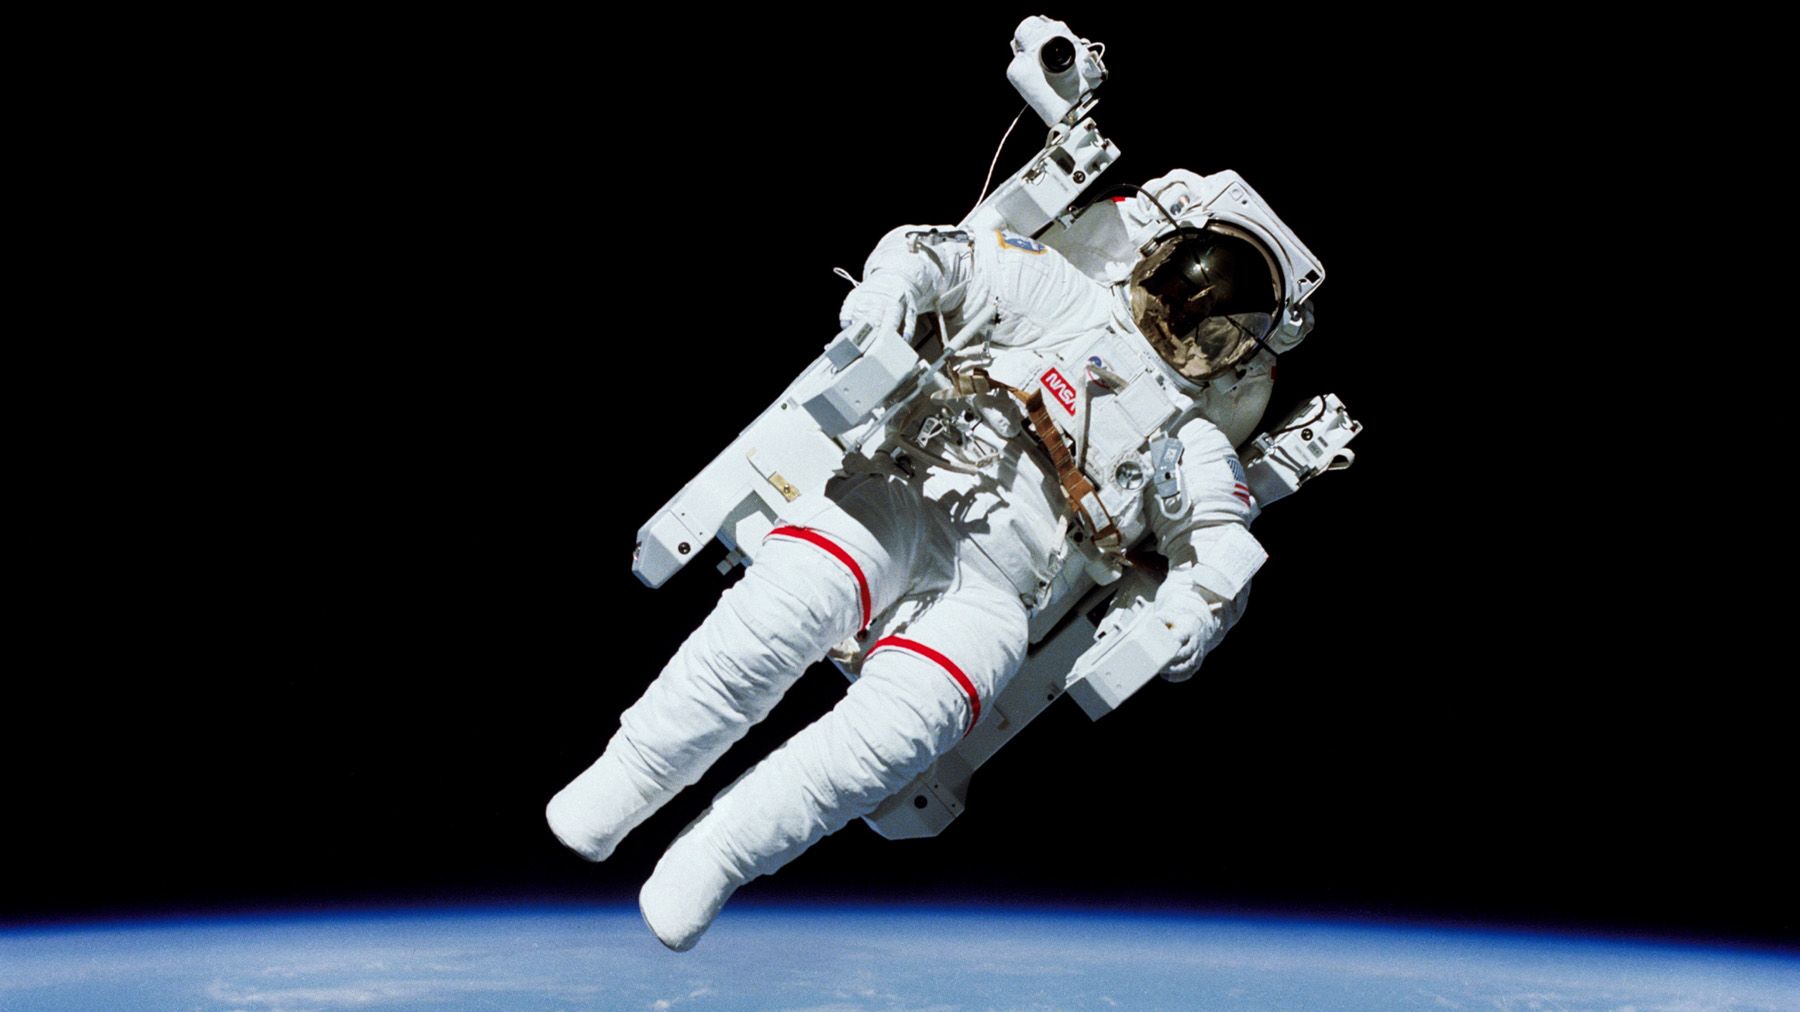 In February 1984, astronaut Bruce McCandless became the first astronaut to float in space untethered, thanks to a jetpack-like device called the Manned Maneuvering Unit. The units are no longer used, but astronauts now wear a similar backpack device in case of emergency. 